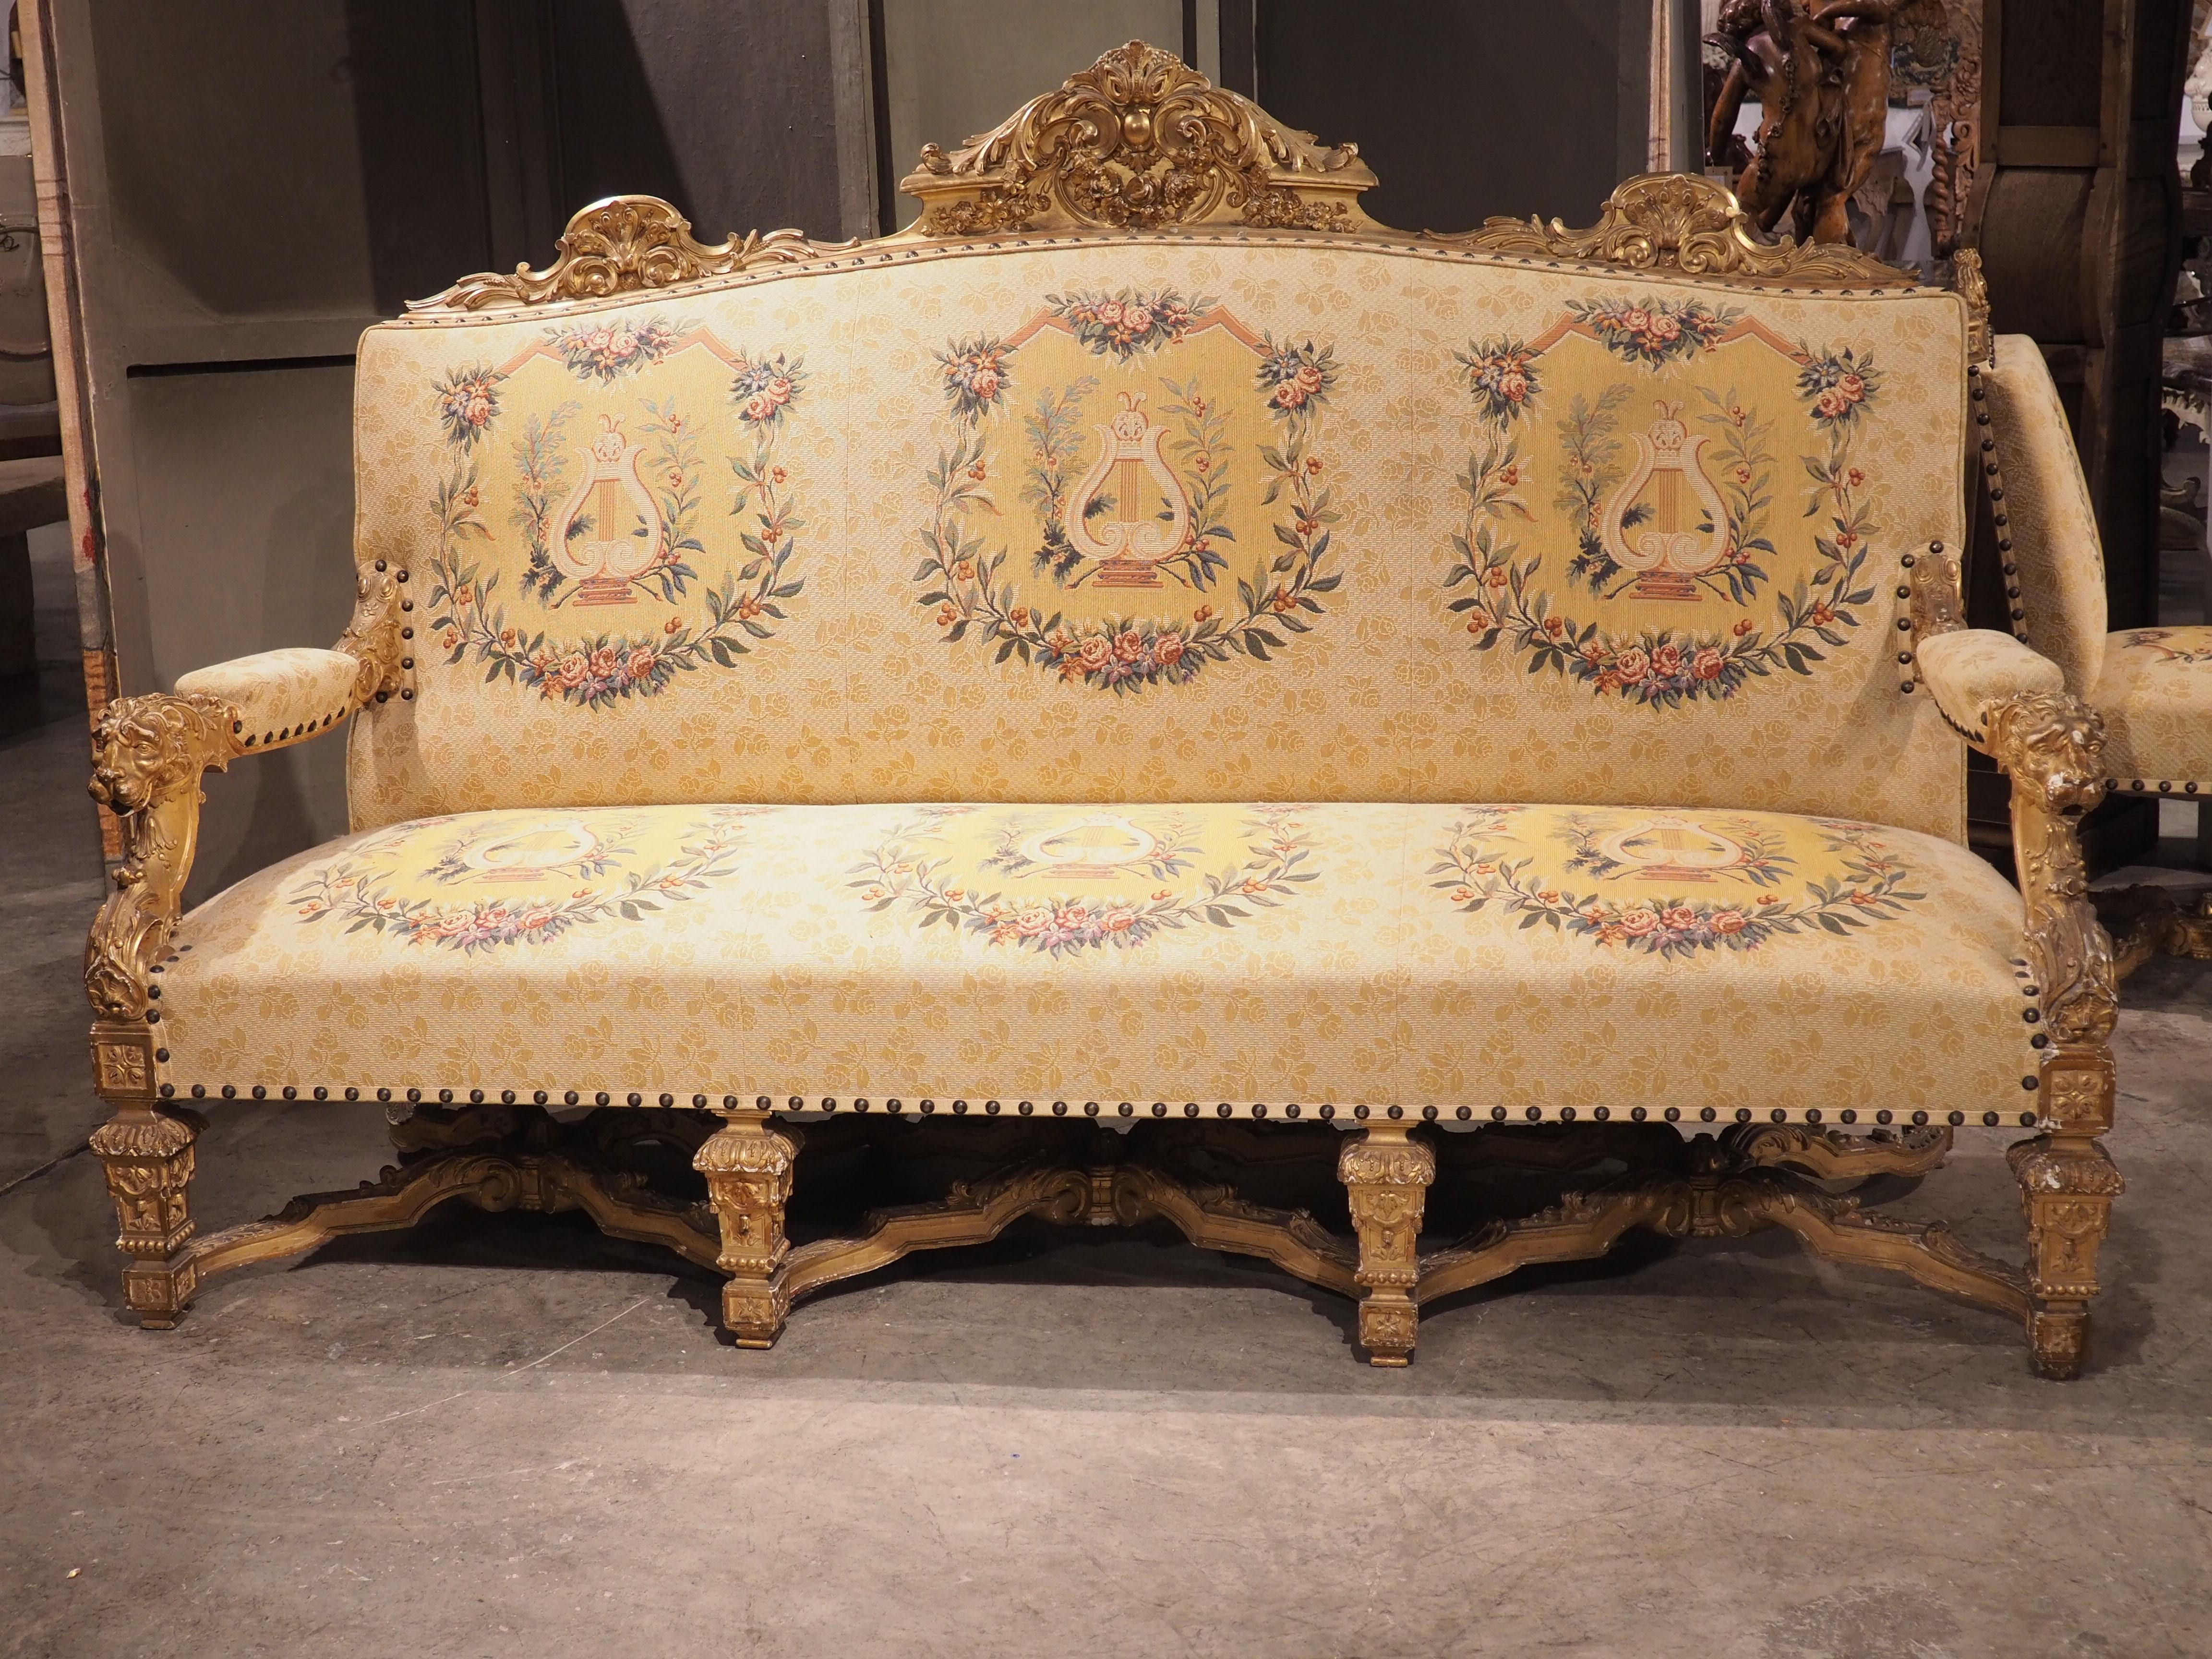 This majestic giltwood Chateau salon suite is from France and dates to circa 1880. There are four side chairs, two armchairs (fauteuils), and a canapé. All have square baluster legs and volute x-stretchers. All the wood has been richly sculpted and